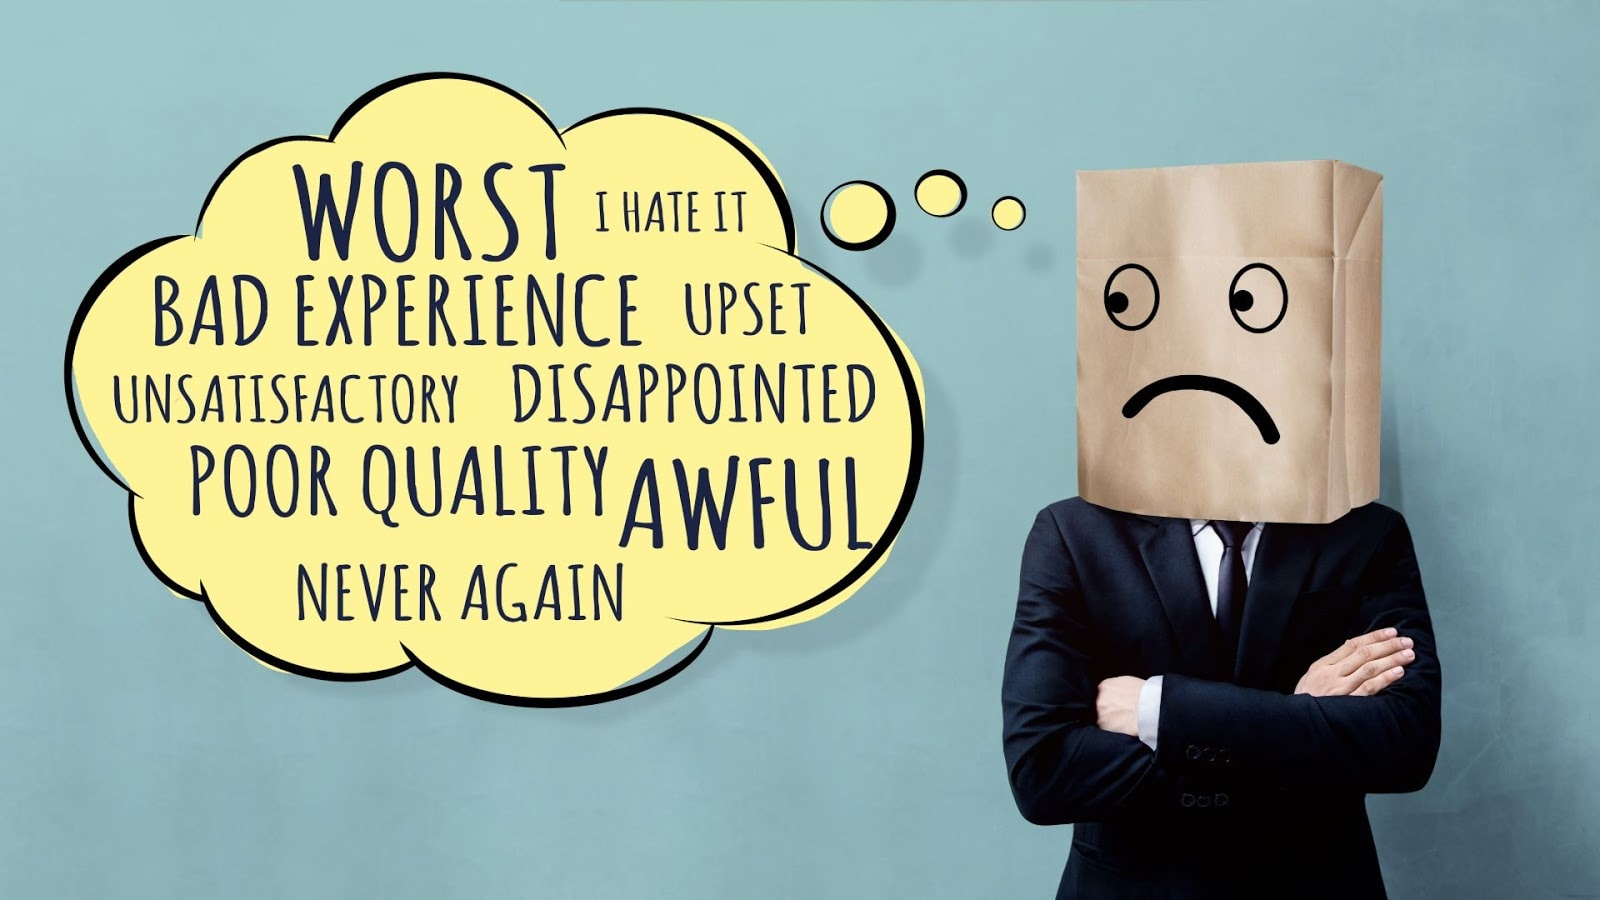 A man with a paper bag on head worries about negative reviews